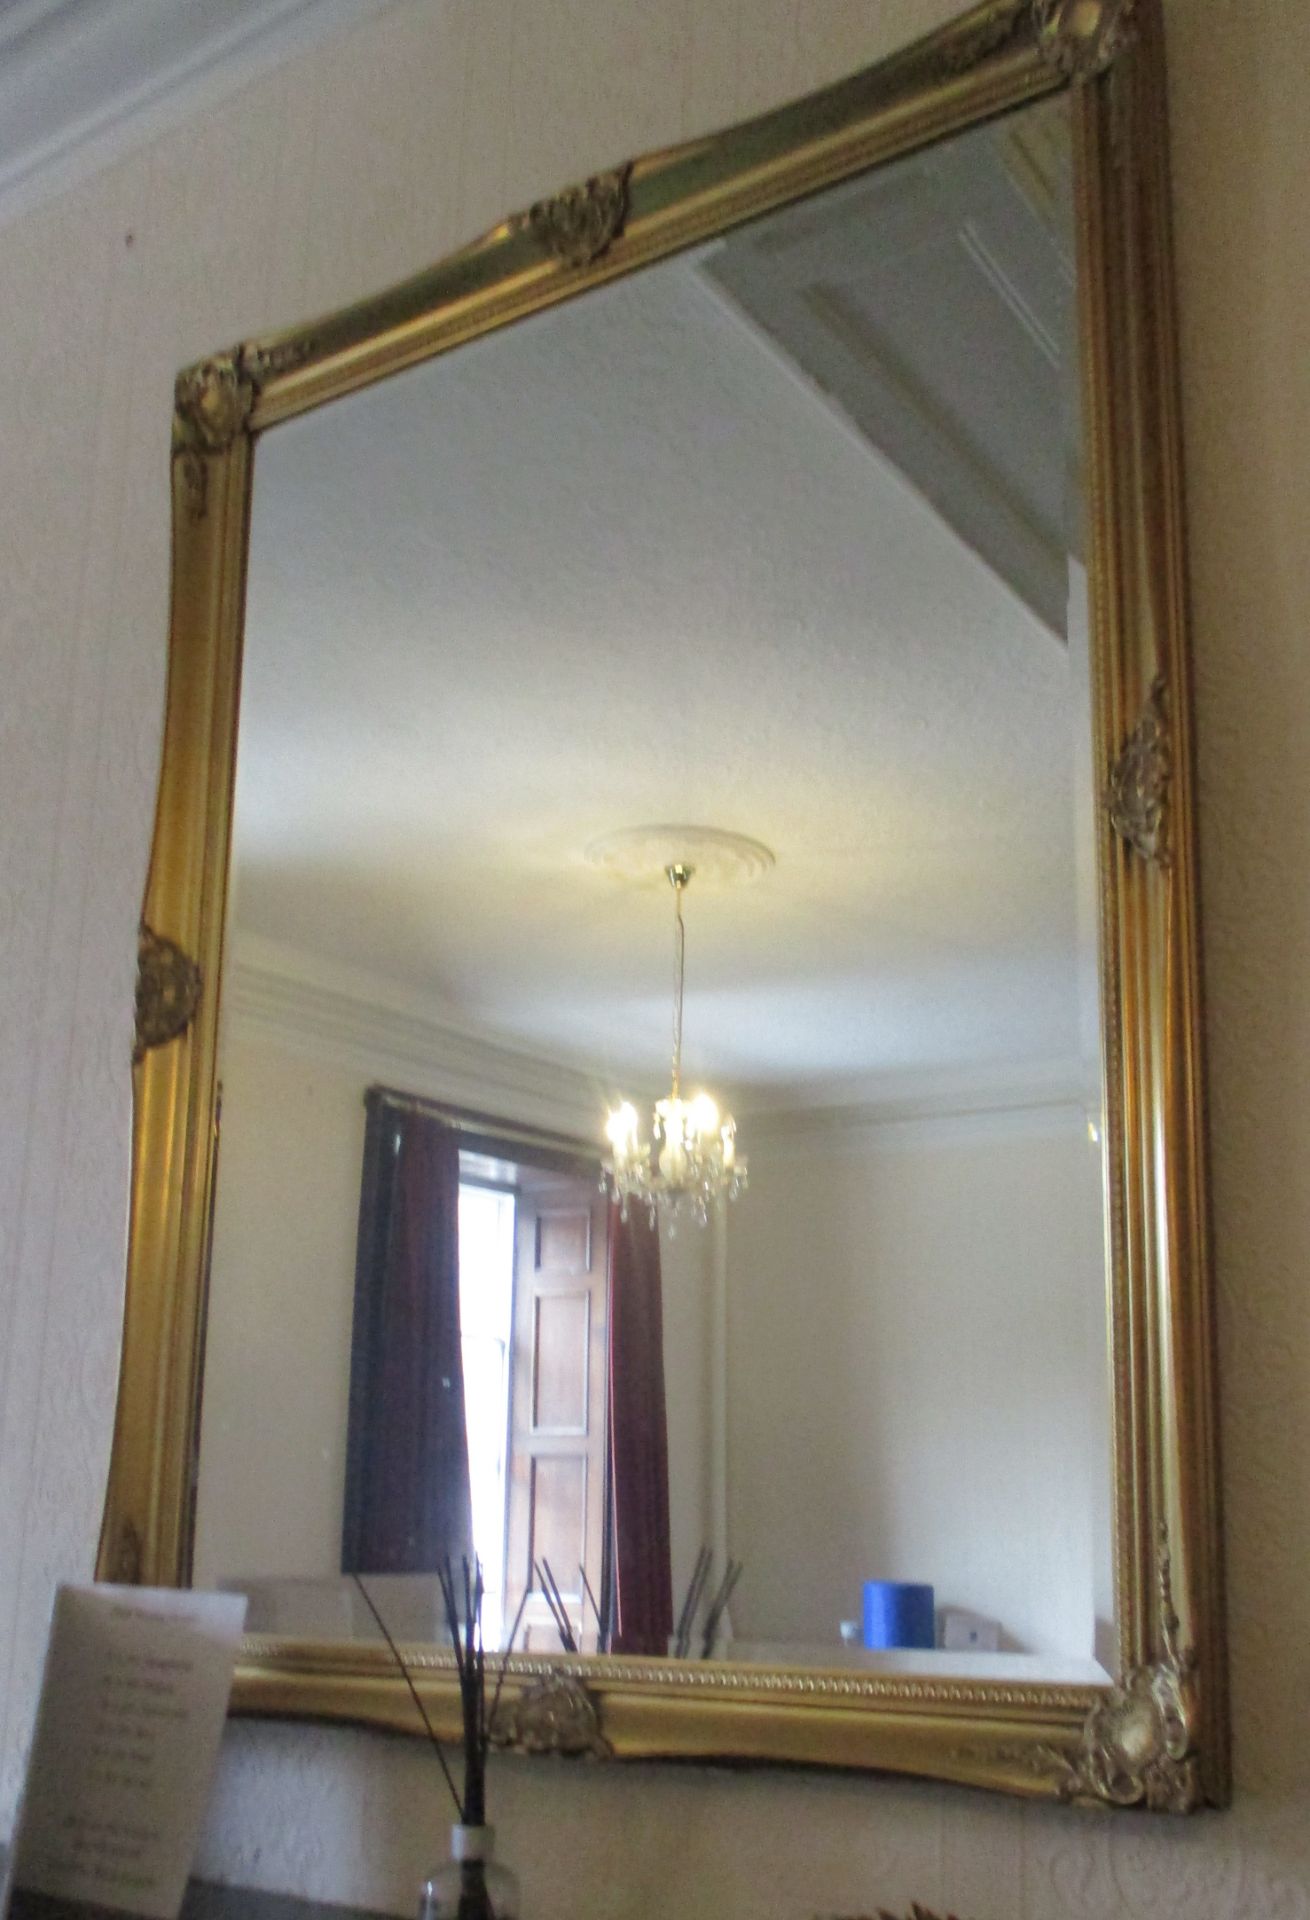 Large gilt framed wall mirror 130 x 100cm. - Image 2 of 2